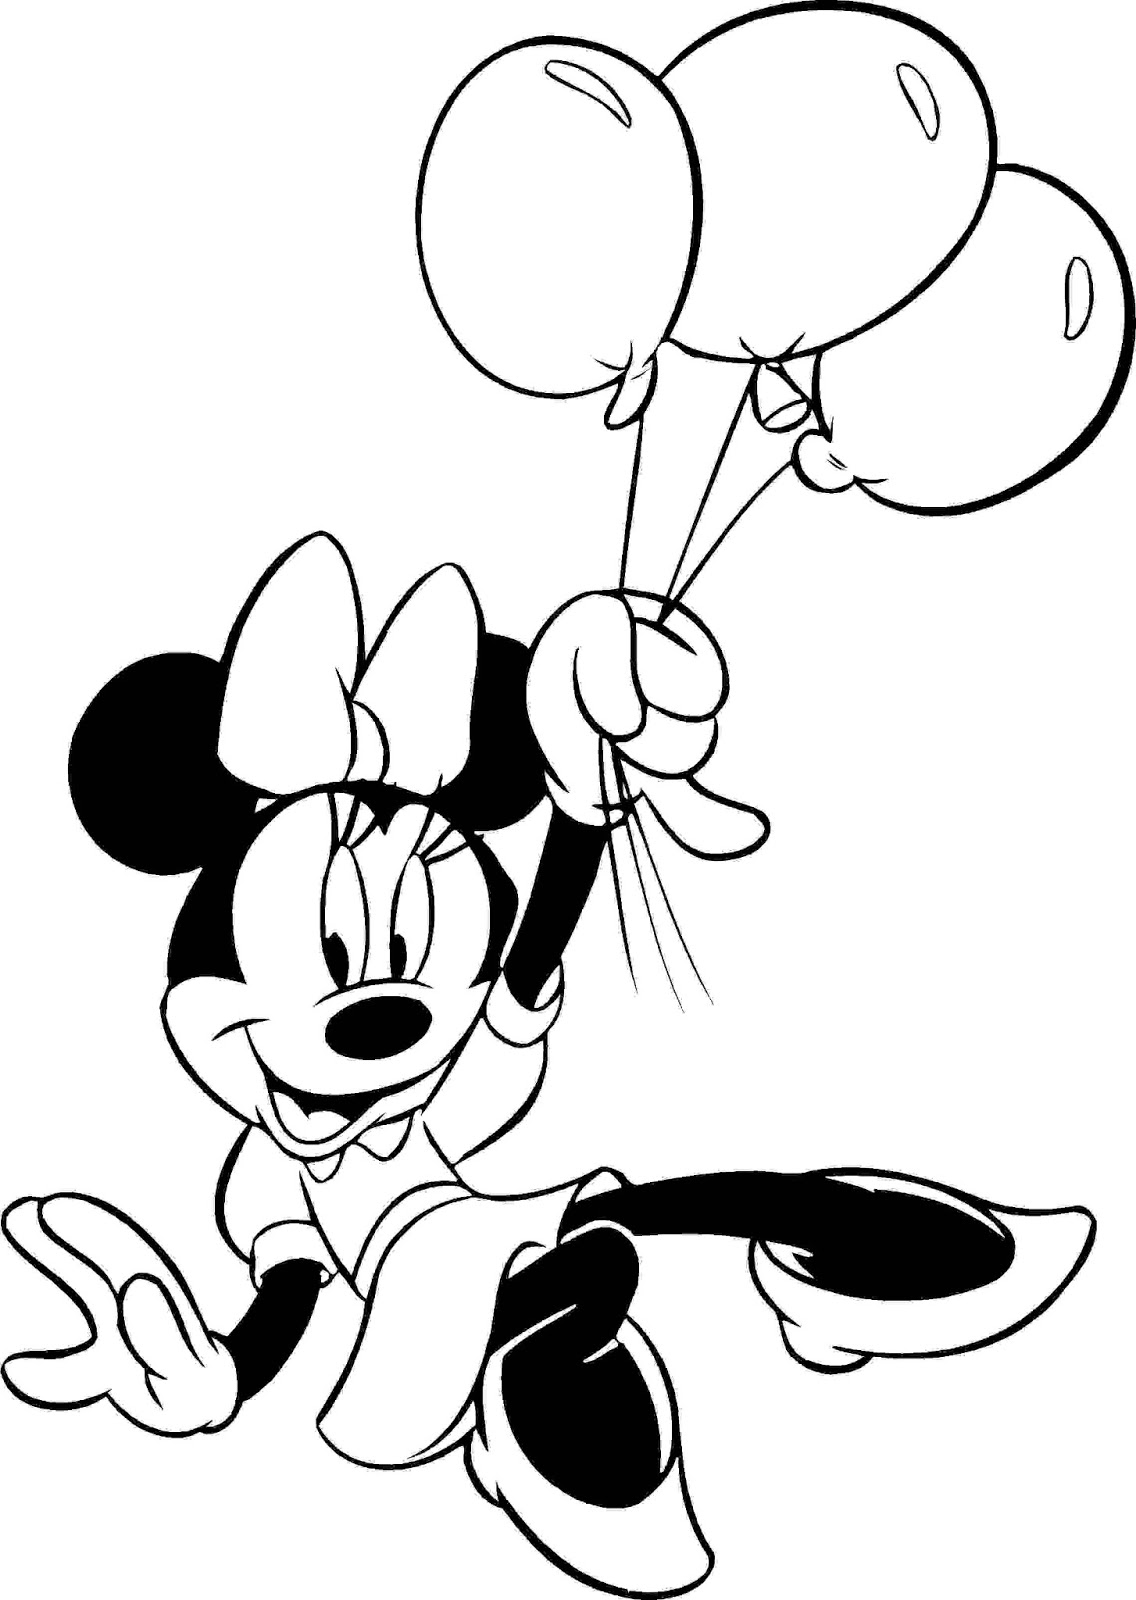 baby mickey and minnie coloring pages